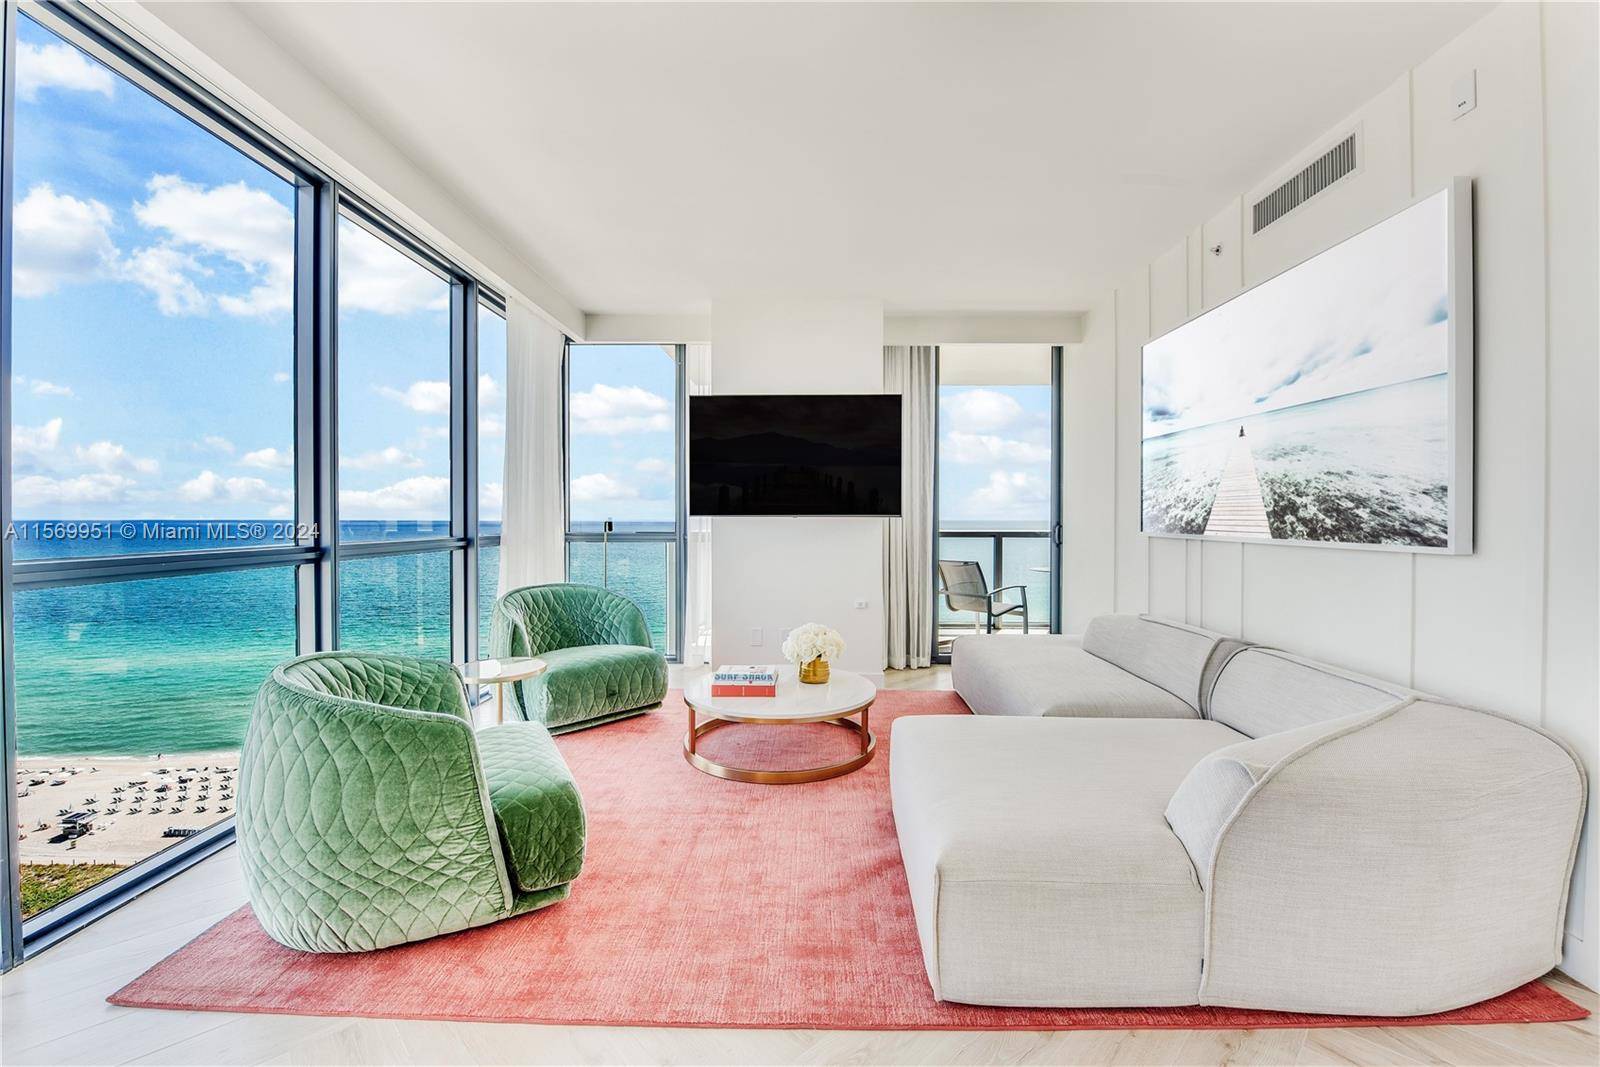 Discover Oceanview Model M Marvelous Suite at The W South Beach, an exquisitely furnished move in ready 1 Bed 1 Bath direct oceanfront condo on the 14th floor.